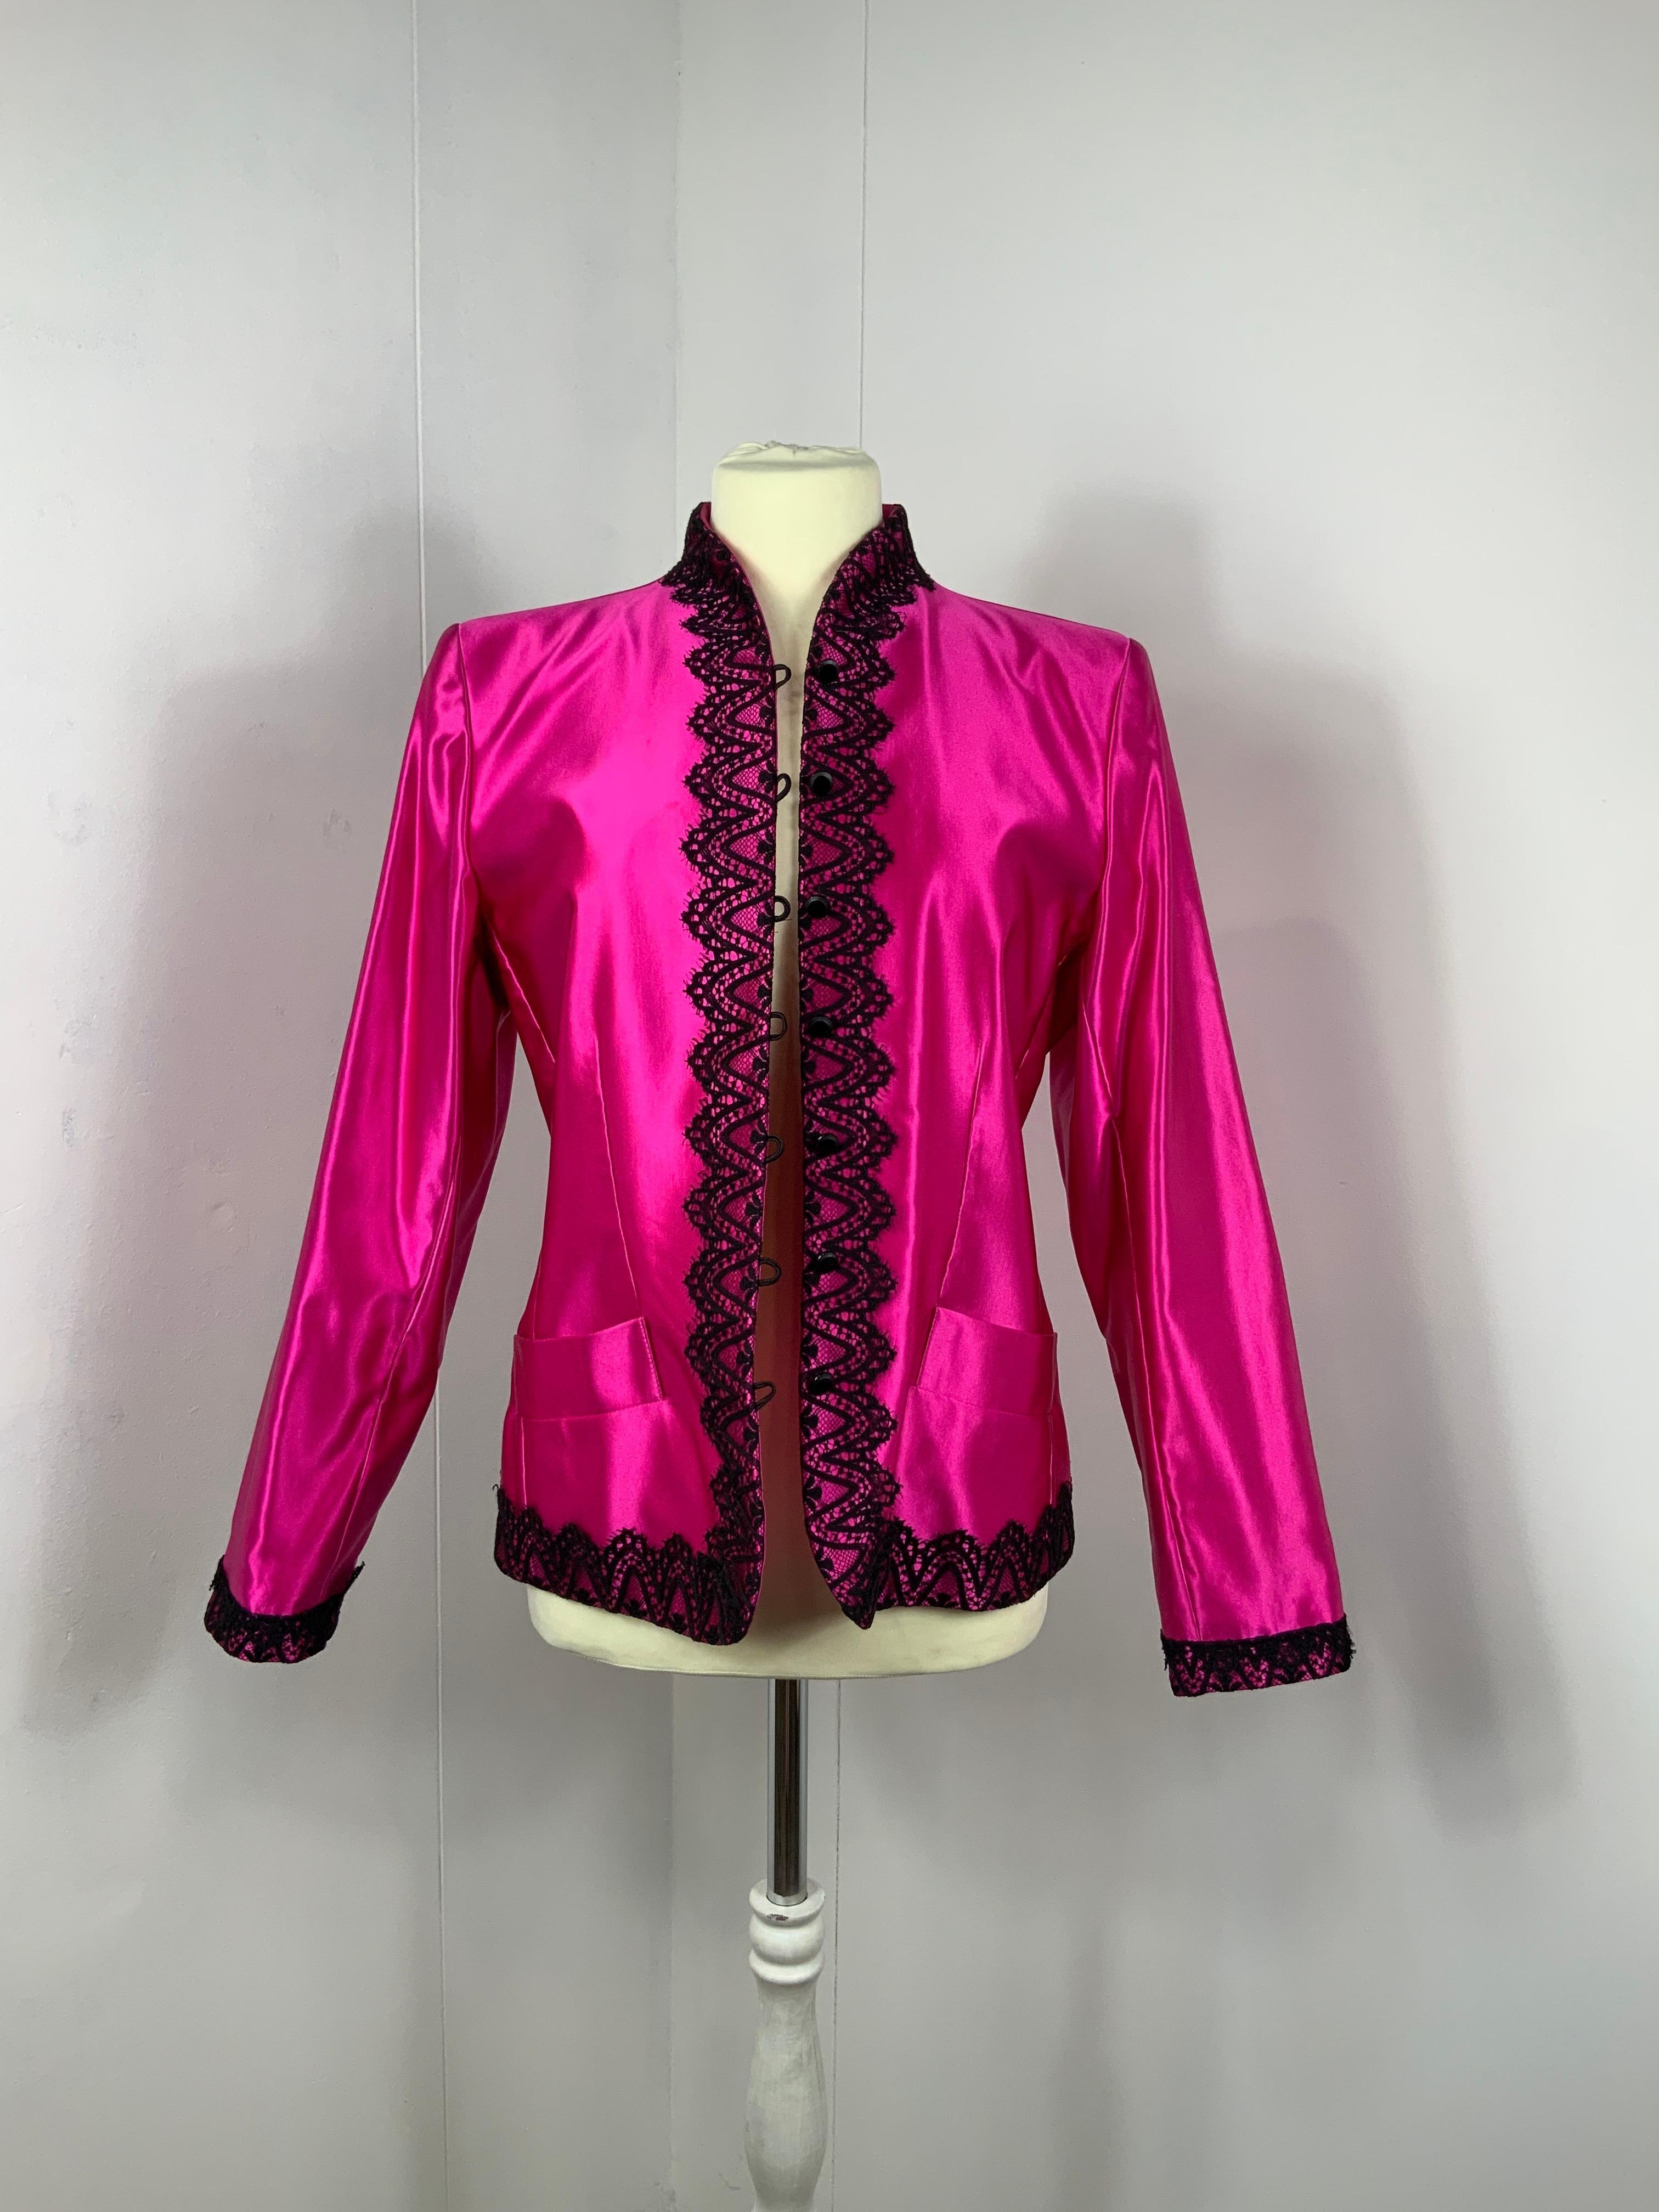 Yves Saint Laurent Variation Fucsia tailleur  In Good Condition For Sale In Carnate, IT